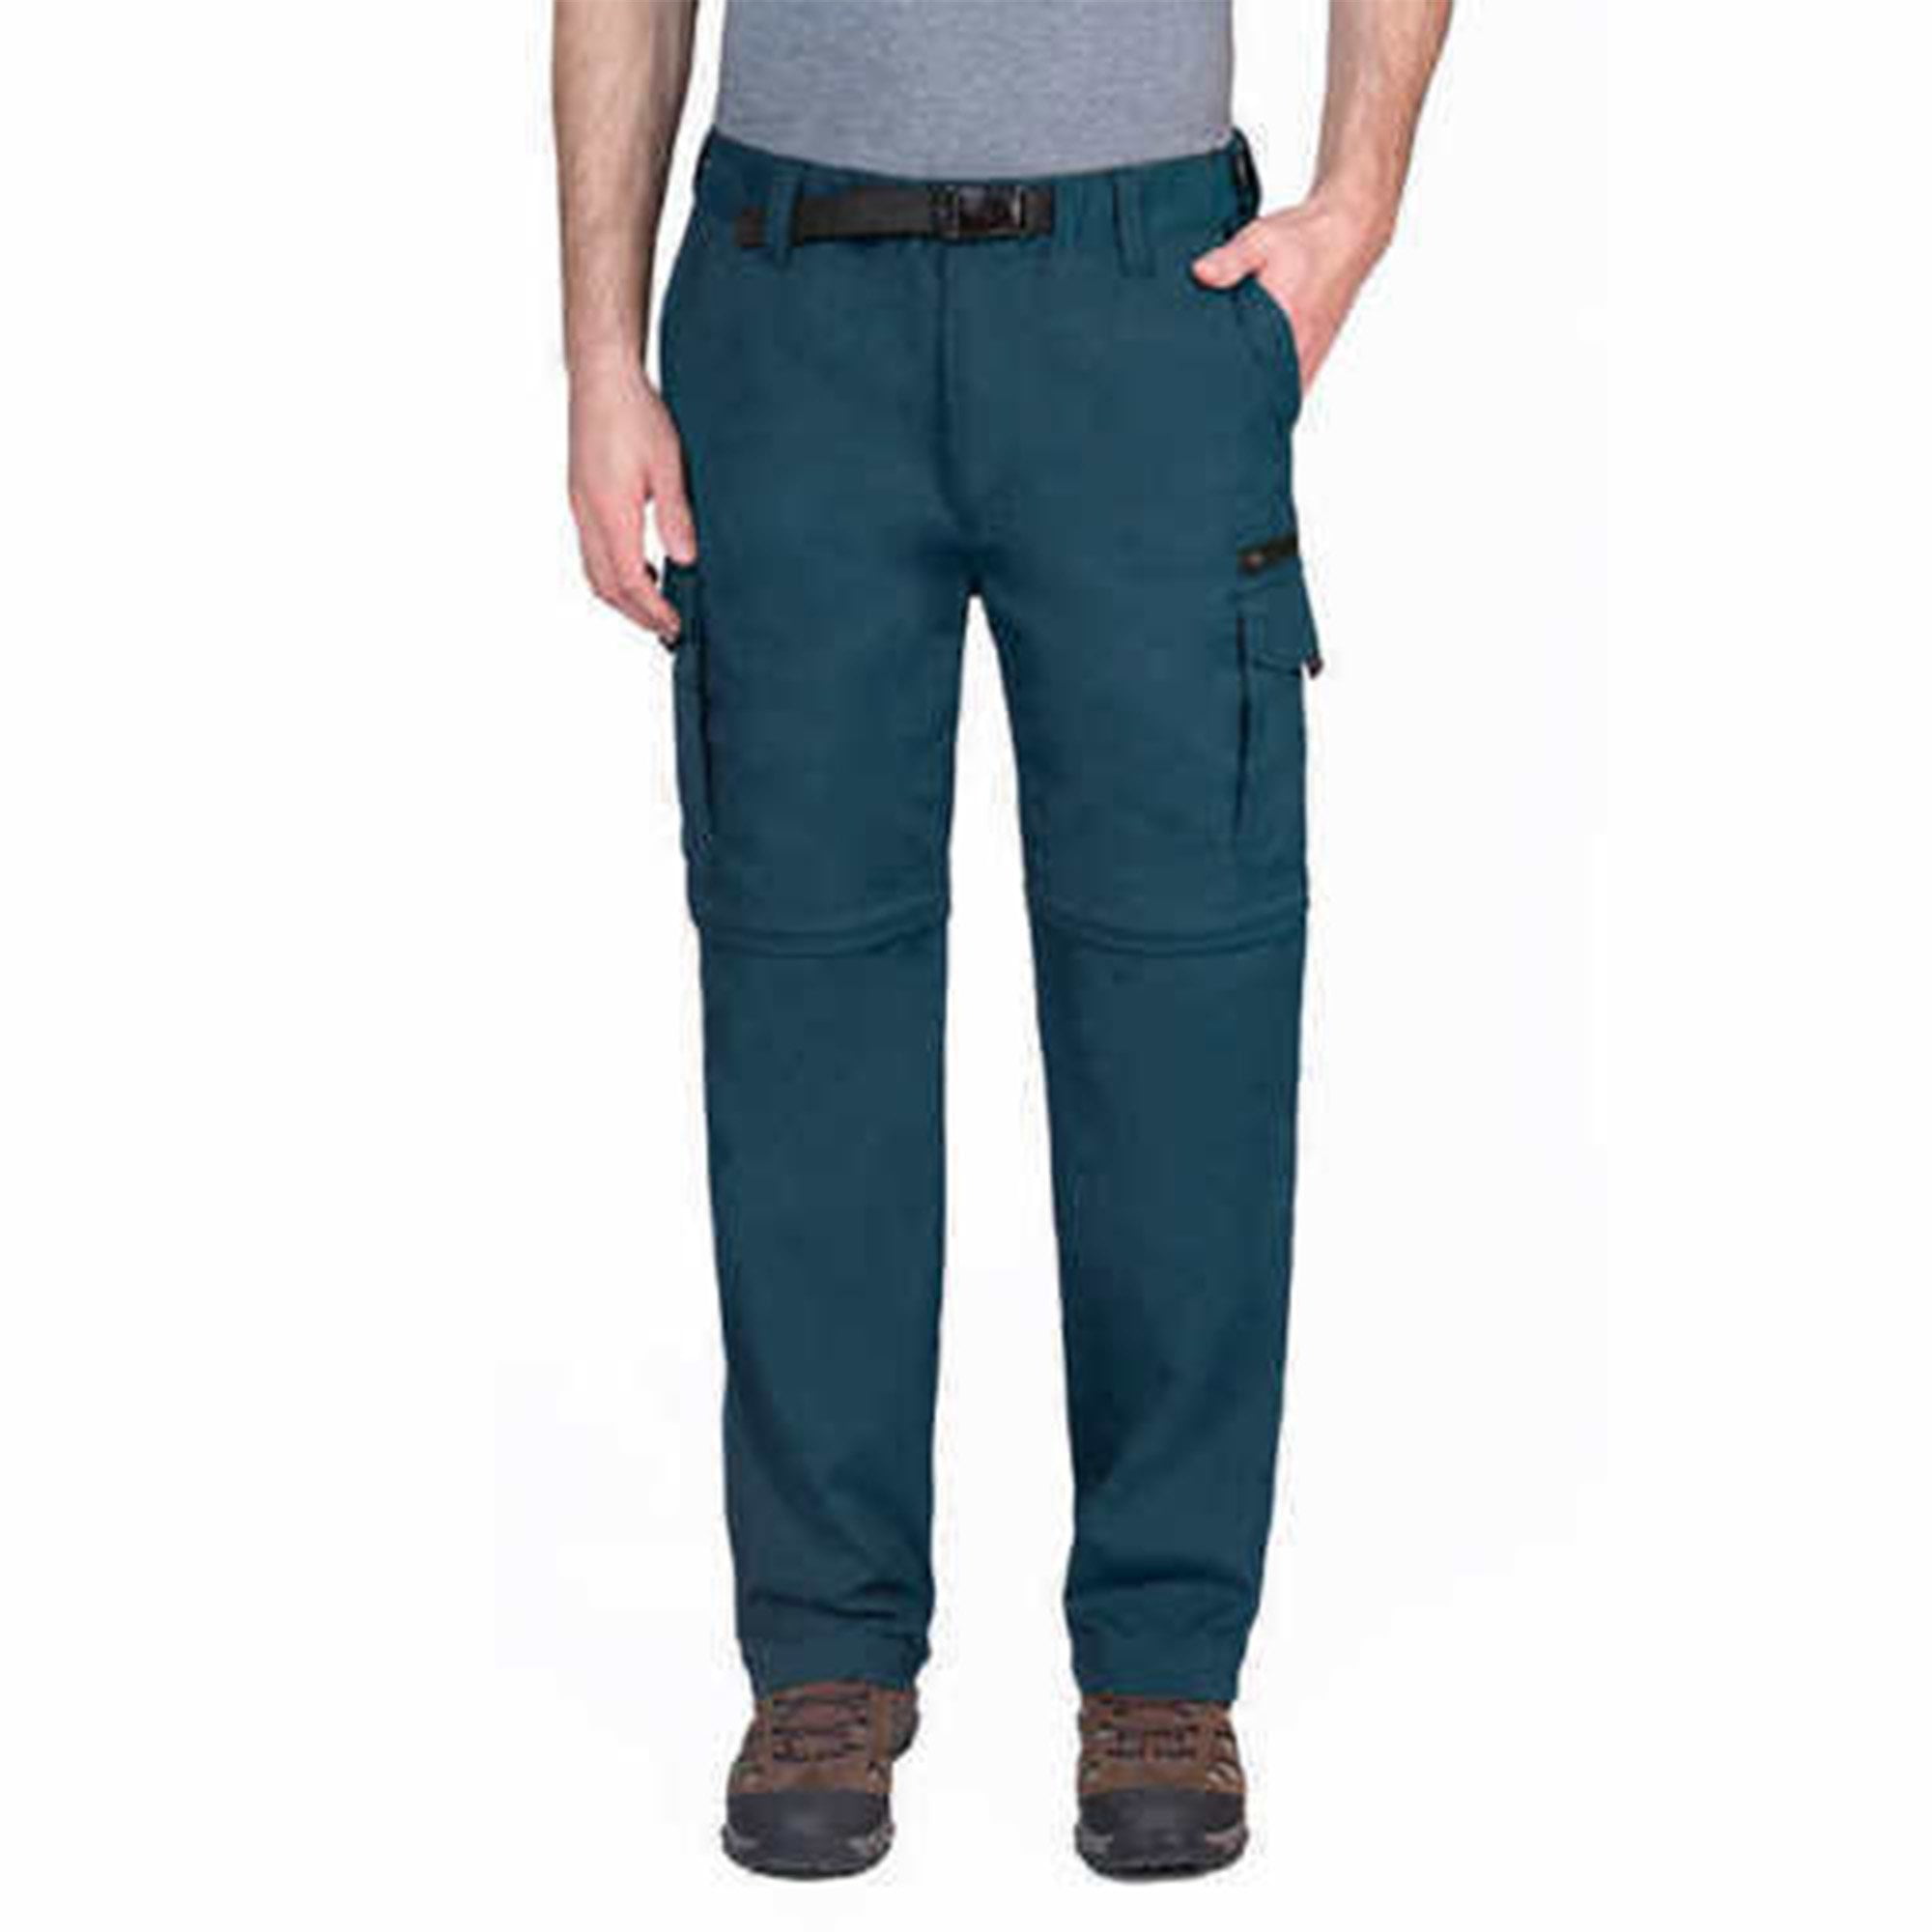 bc clothing mens convertible pant with stretch,variety (xlx34, teal)